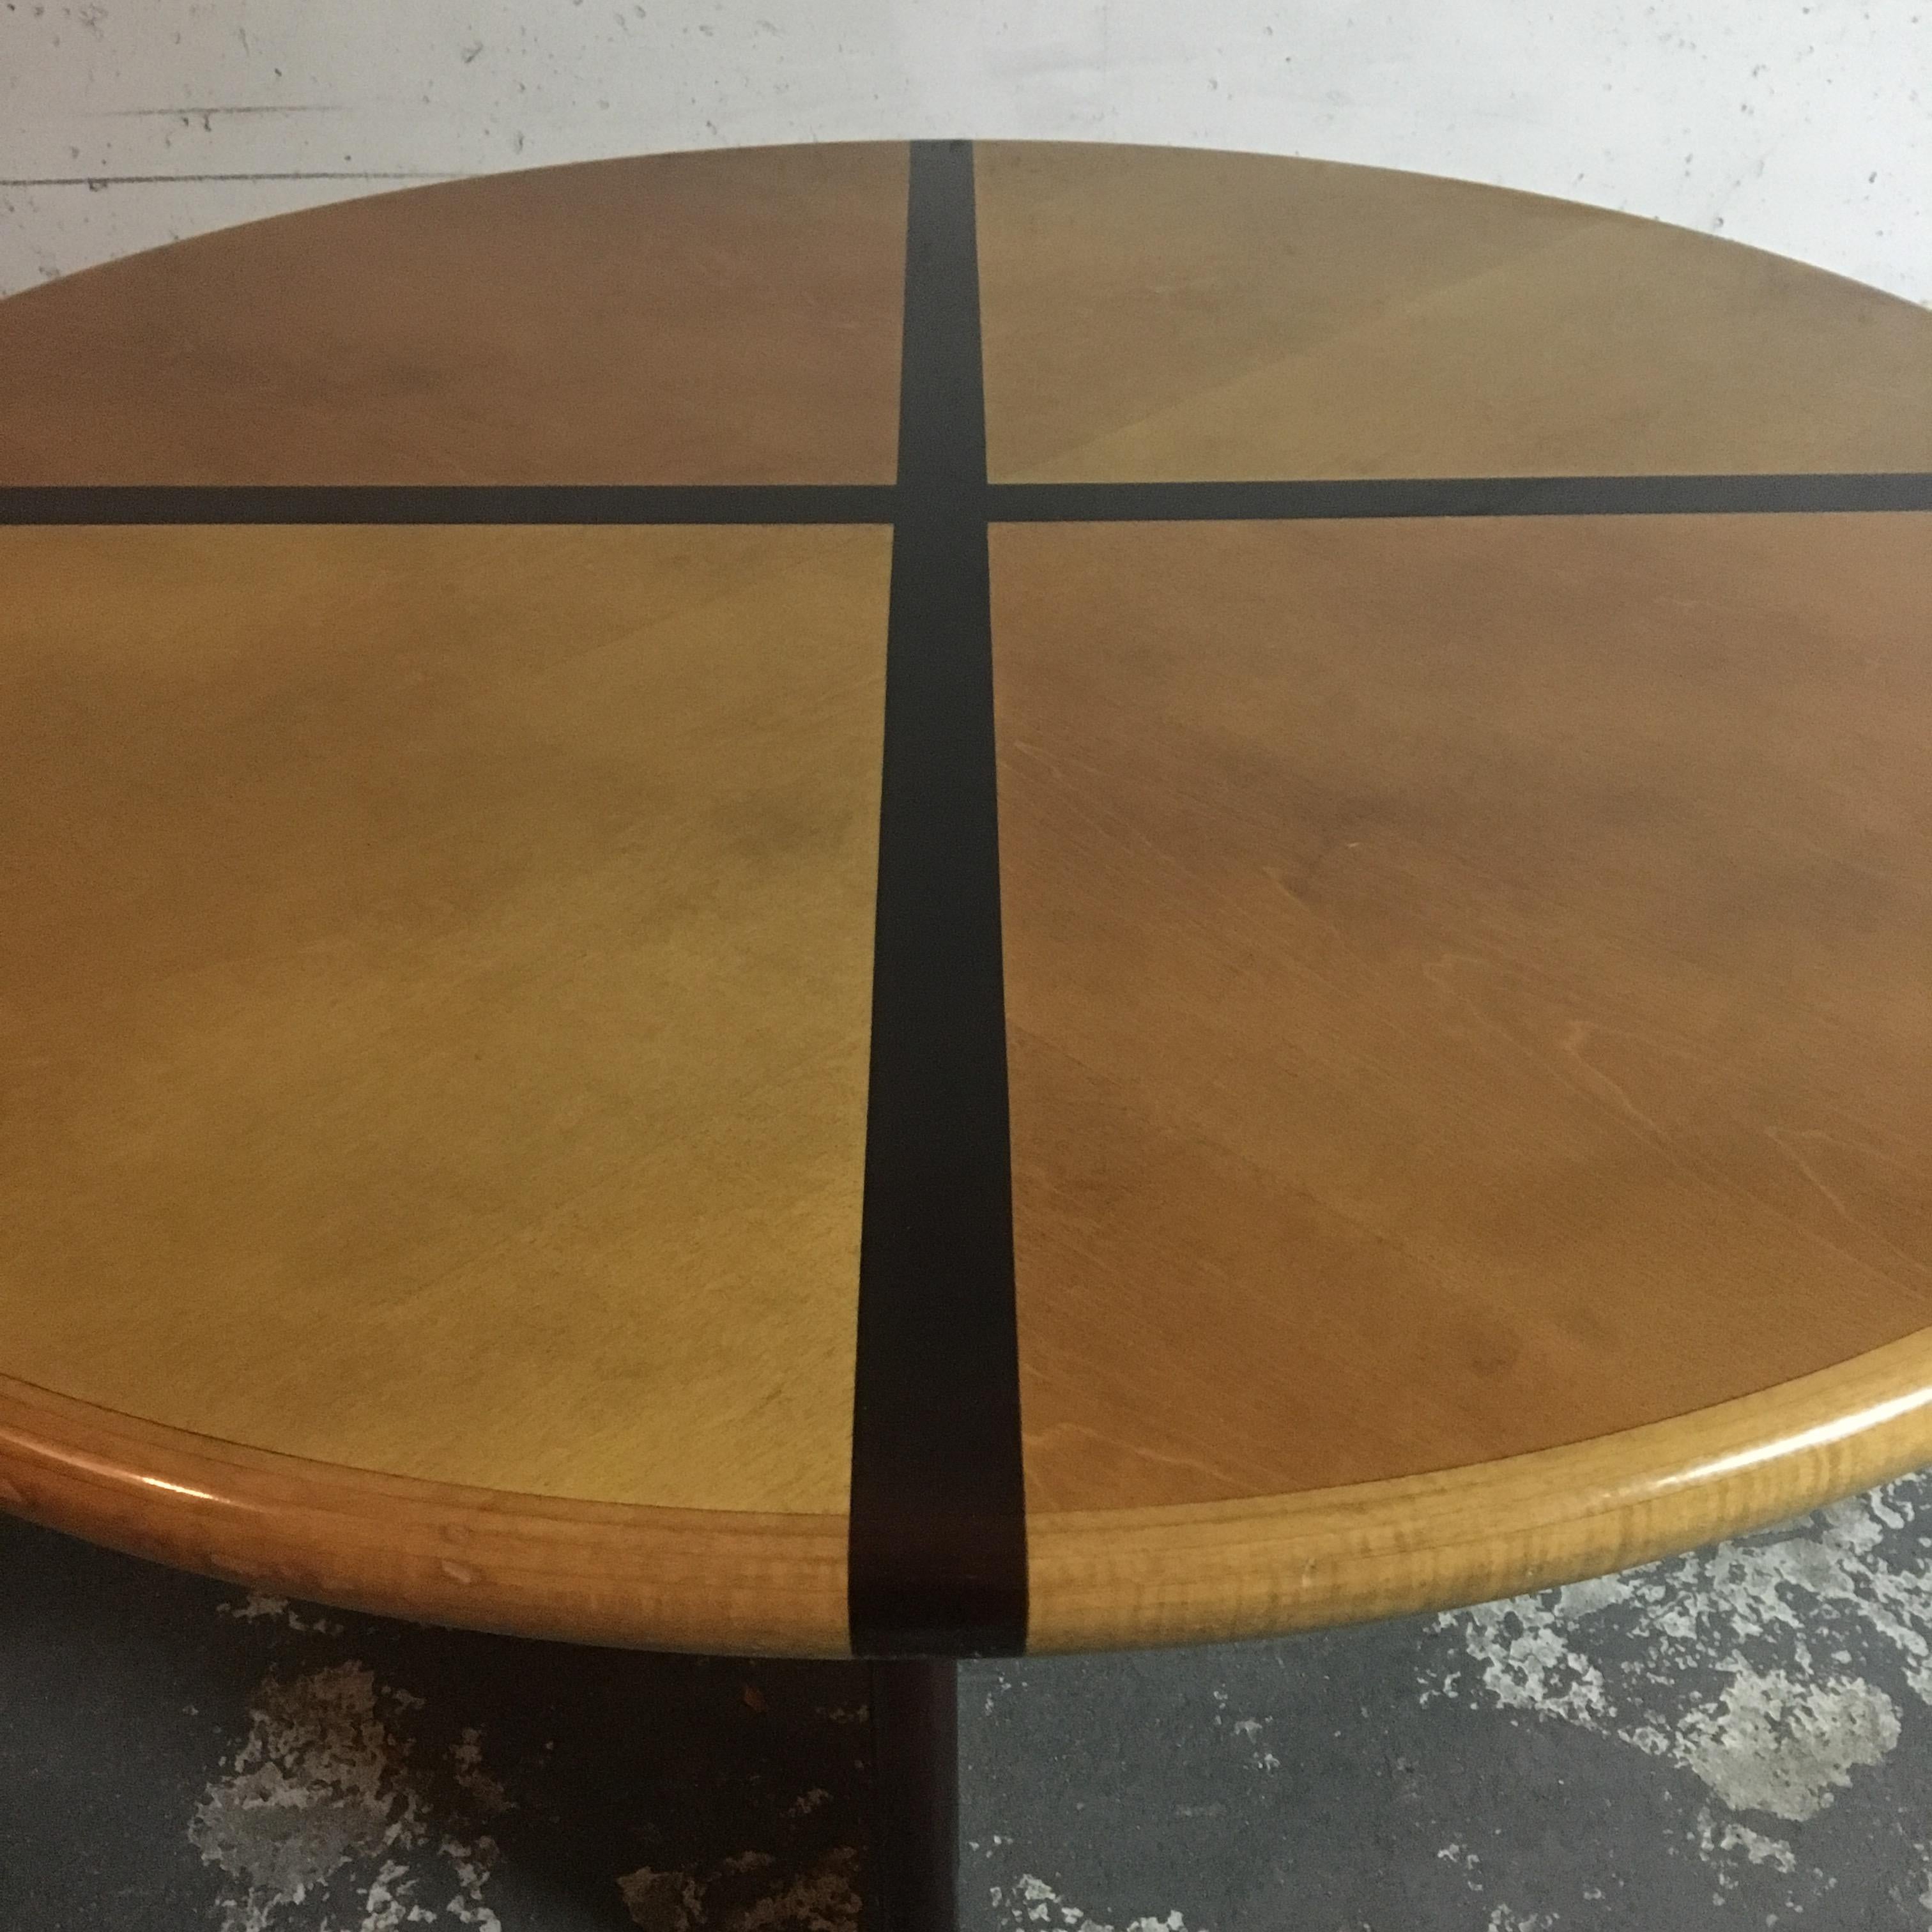 A very original French round table produced in France during the 1970s. The table is designed for 4 people, given the division that results from the structure of her legs. A kind of cross on the top side of the table which continues downward through